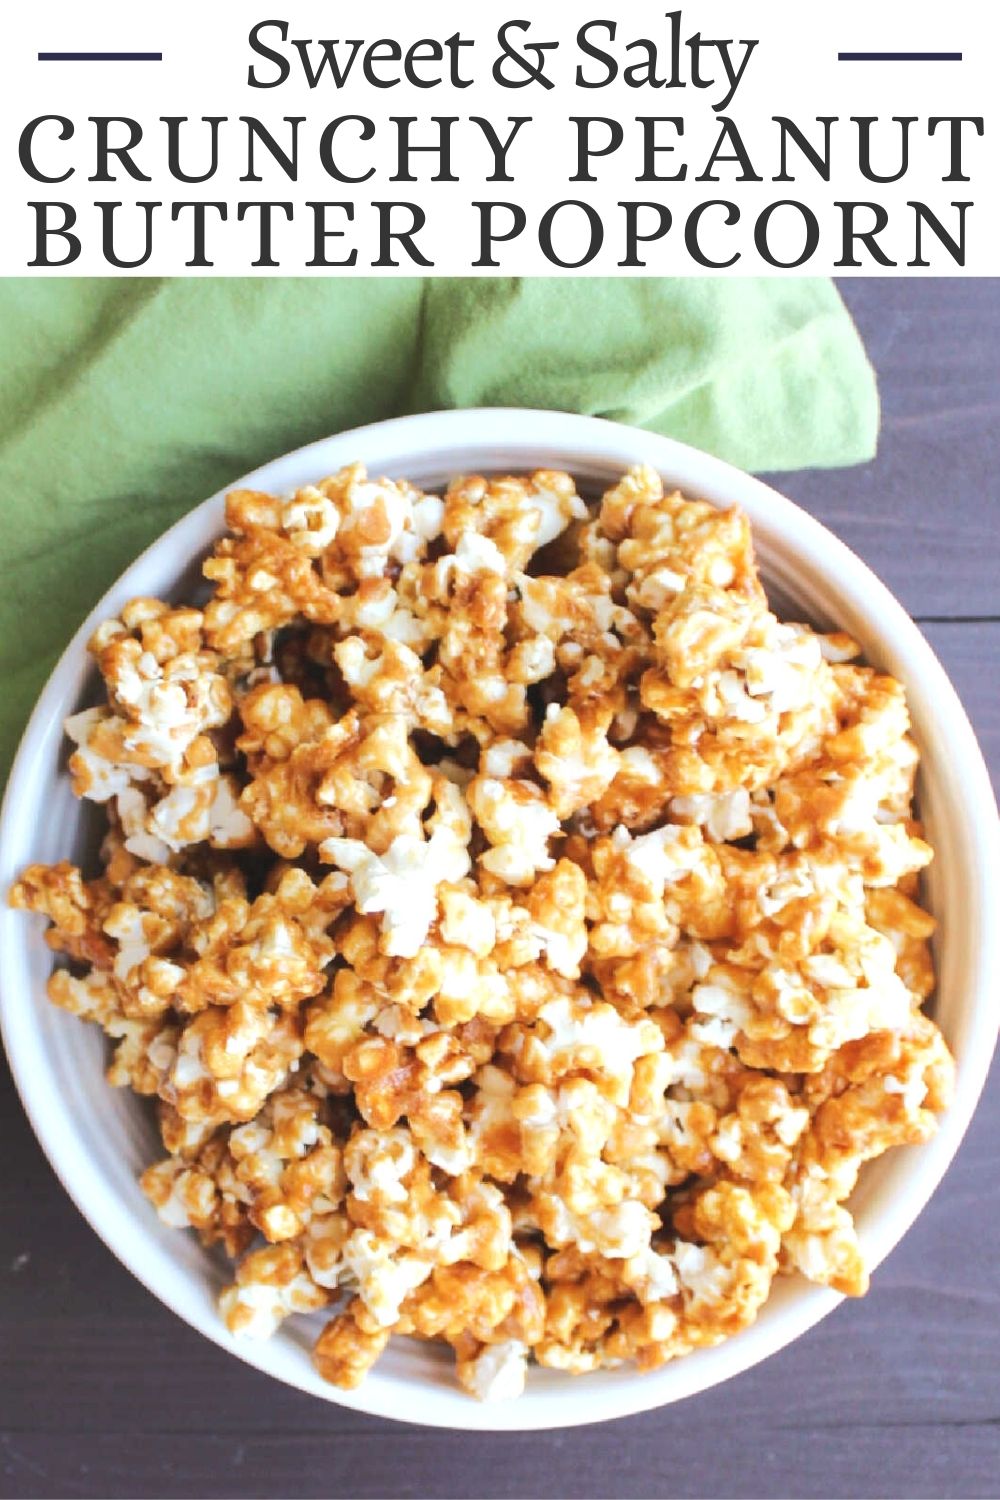 Crunchy peanut butter popcorn has that perfect sweet and salty balance. It is perfect for movie night, game night, tailgates and more!